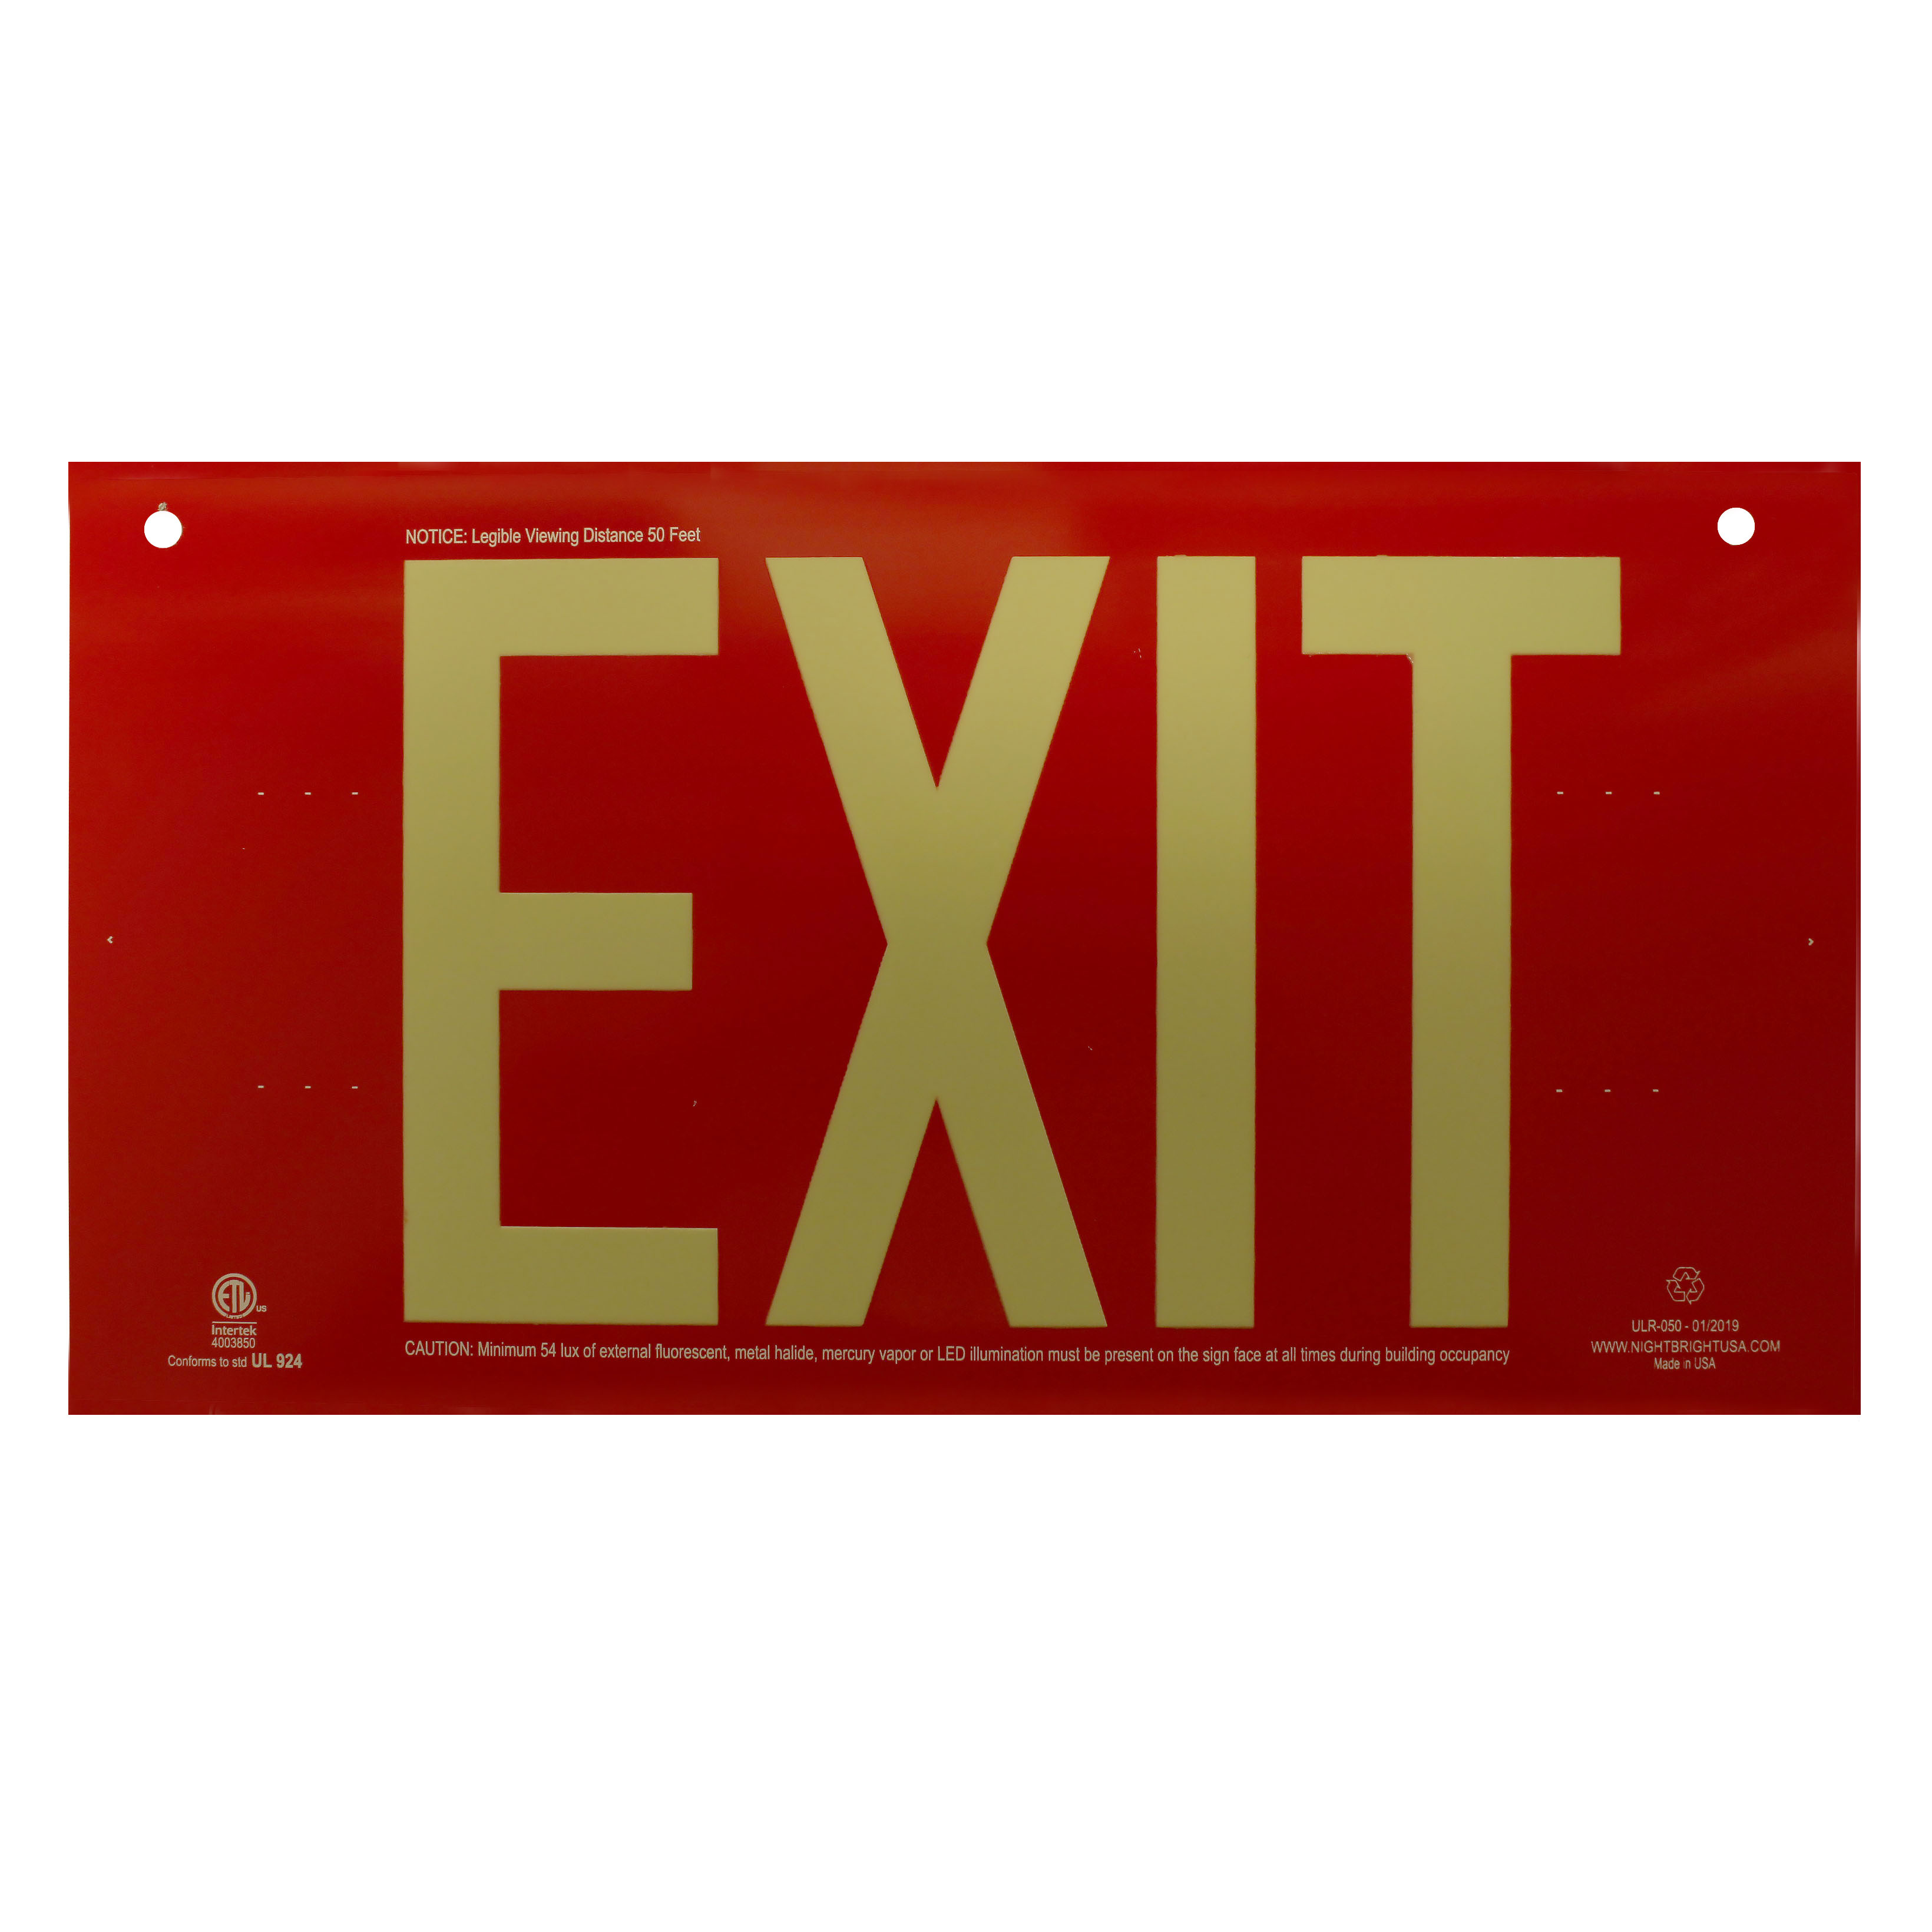 Exit Signs